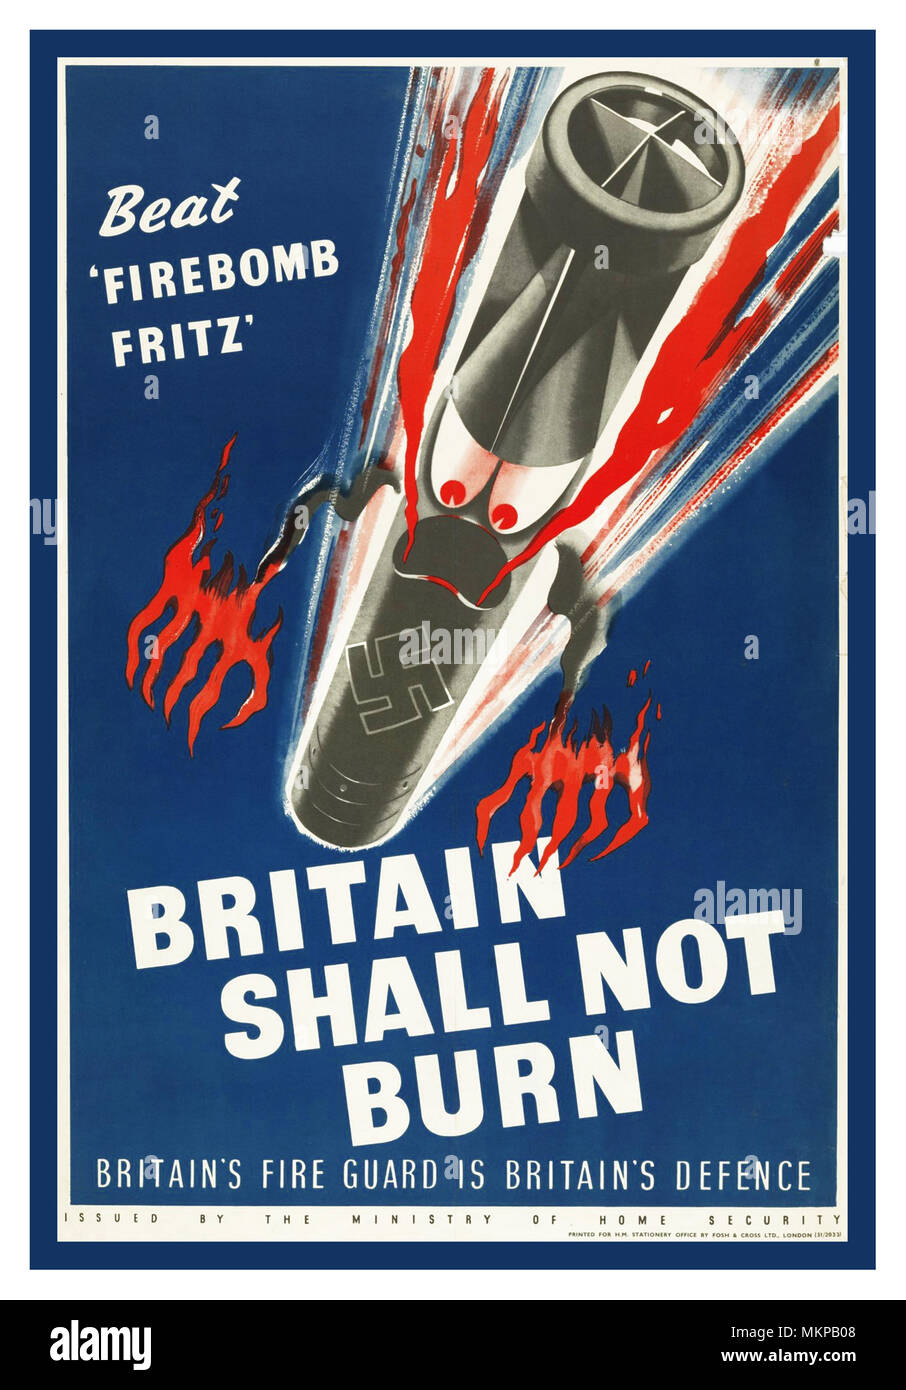 Vintage UK WW2  Propaganda Poster 1942 Beat ‘Firebomb Fritz’ Britain Shall Not Burn. Britain’s Fire Guard Is Britains Defence WW2 British poster. The 'Beat Firebomb Fritz' campaign was 'intended to impress upon 'the-man-in-the-street' his responsibility for fighting fire bombs as a lookout or Fire warden etc Stock Photo